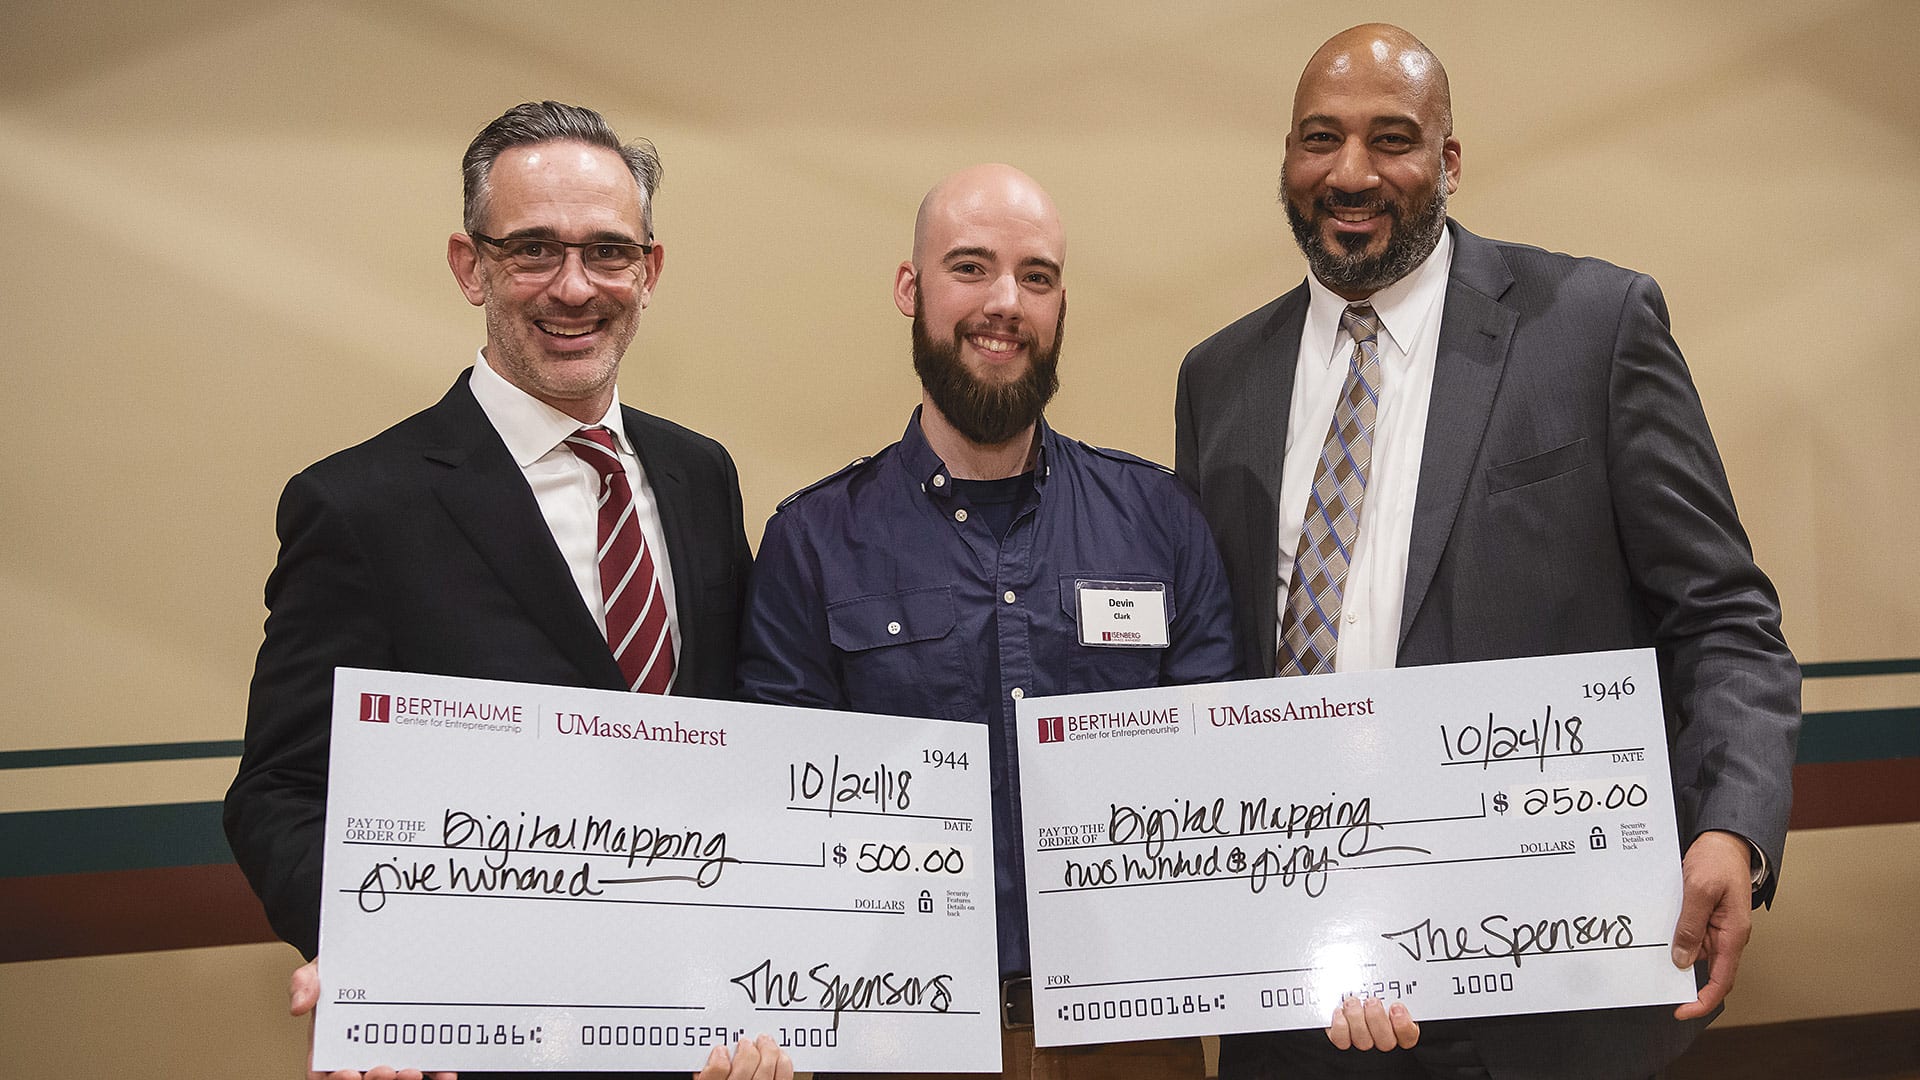 Tom Moliterno (left) and Gregory Brand (right) present the third prize in the Minute Pitch competition to Devin Clark.